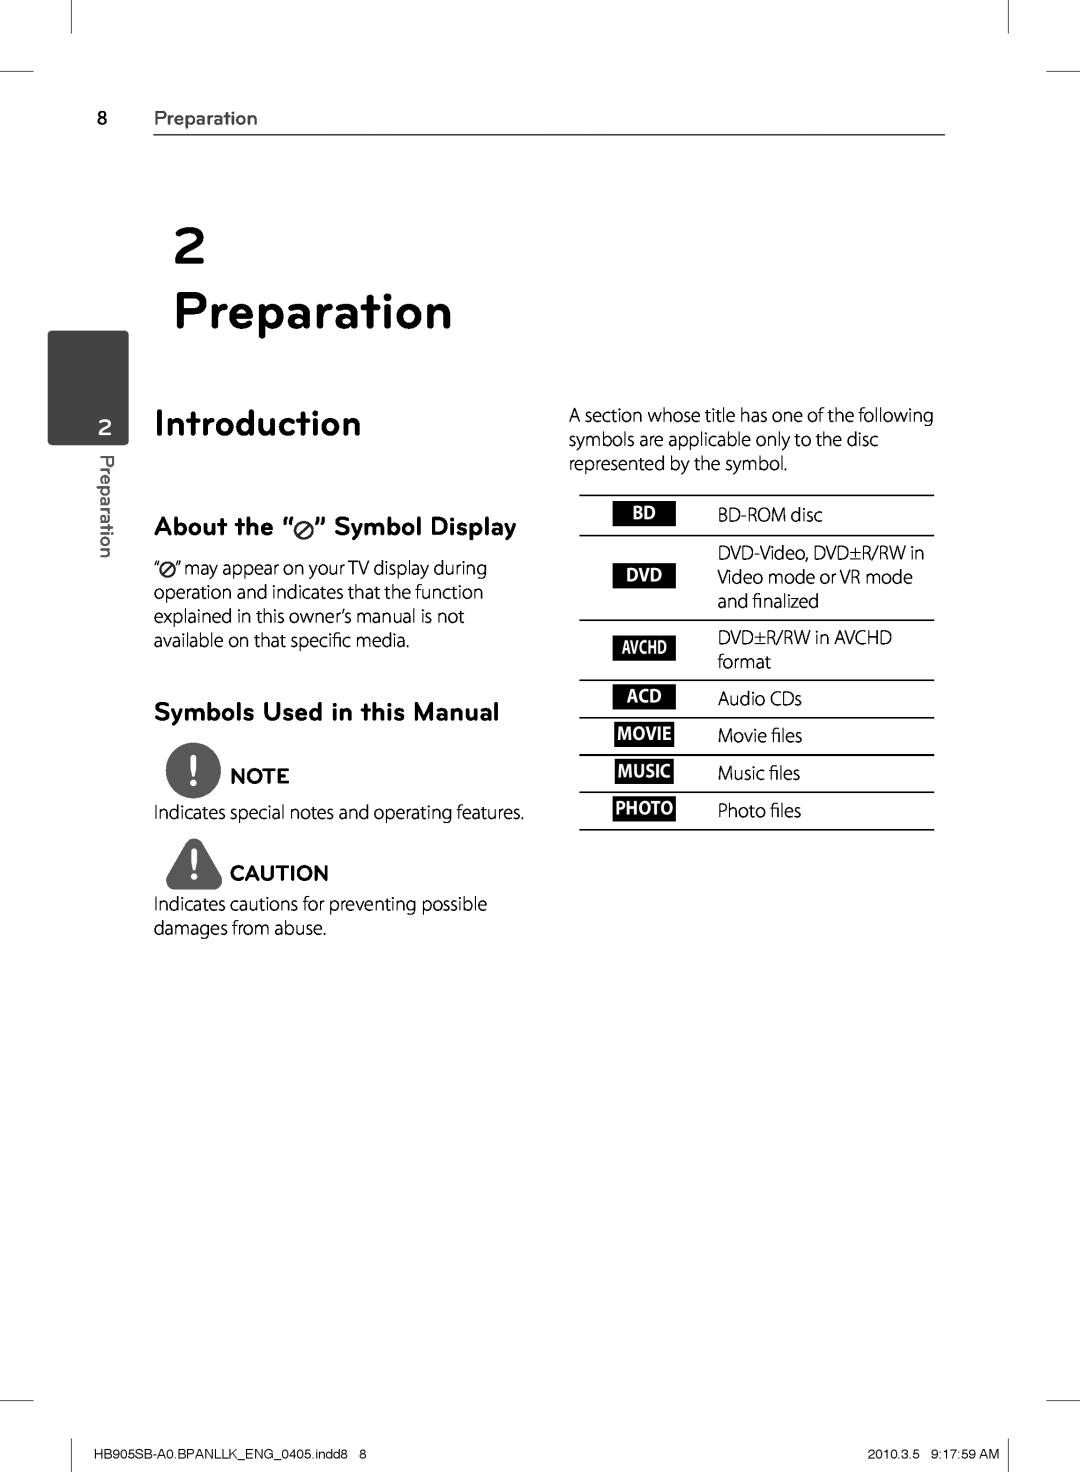 LG Electronics HB905SB 2Introduction, Symbols Used in this Manual, 8Preparation, About the “ ” Symbol Display 